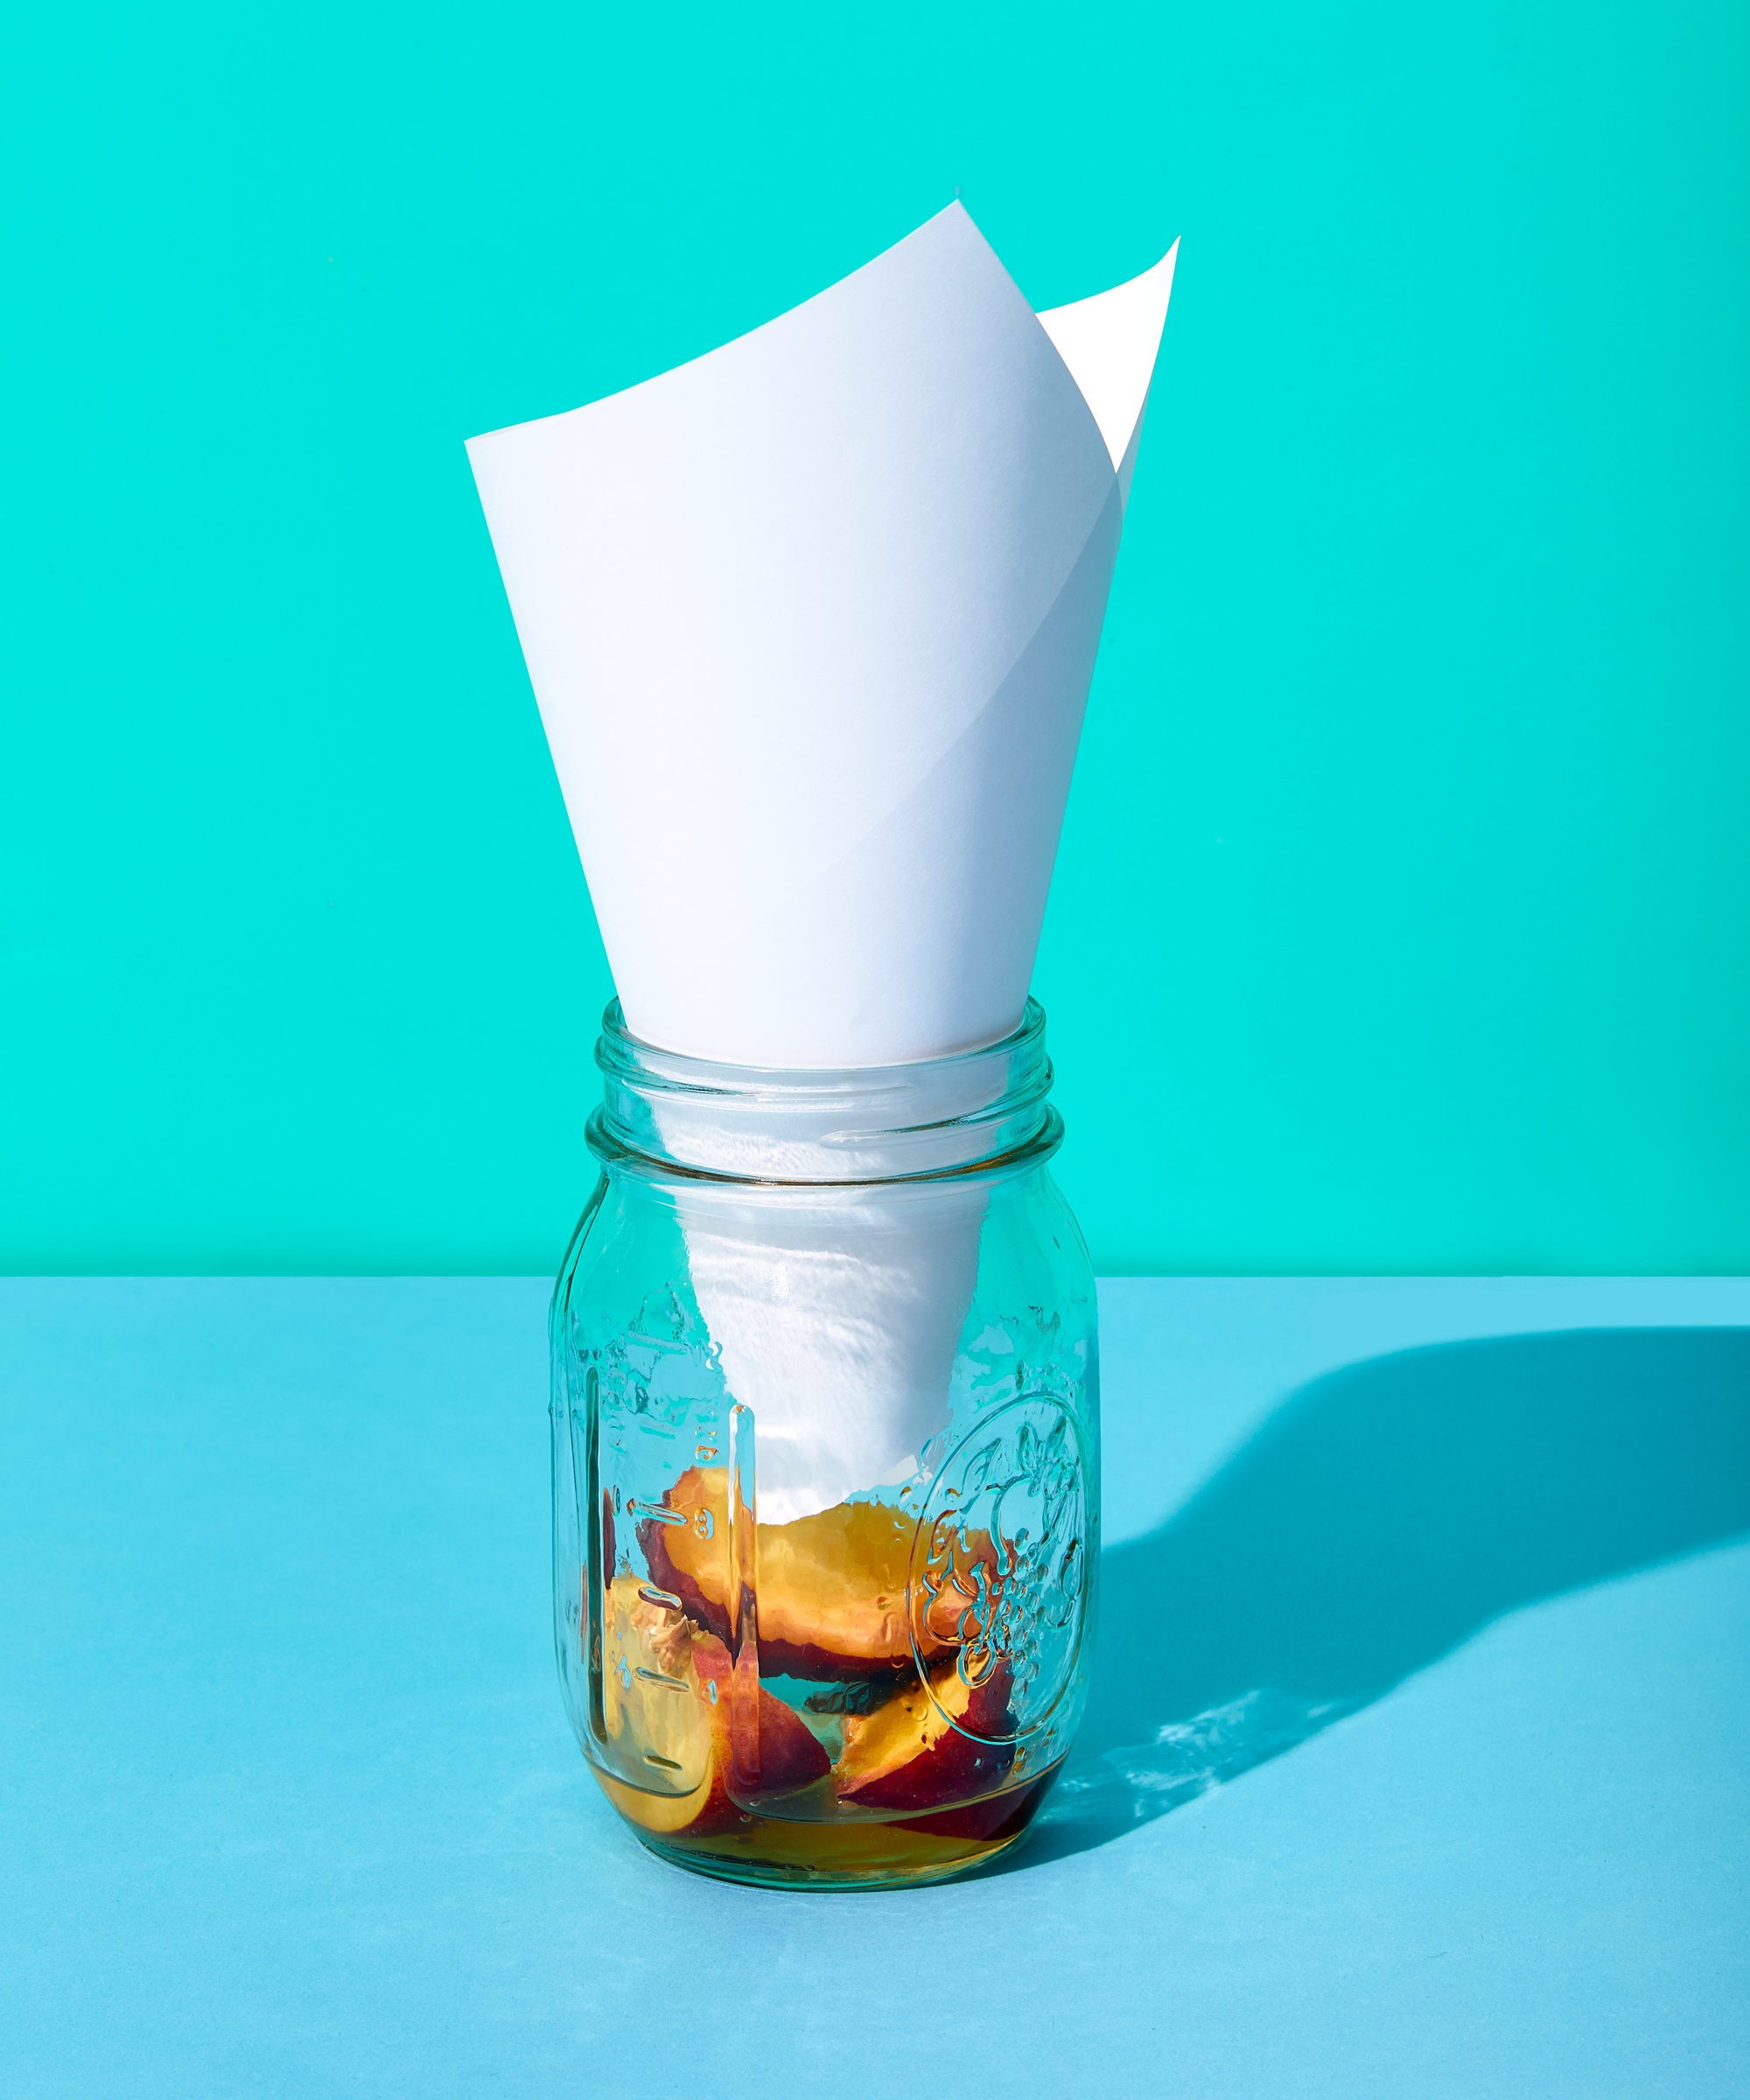 https://hips.hearstapps.com/hmg-prod/images/how-to-get-rid-of-fruit-flies-cone-1559157223.png